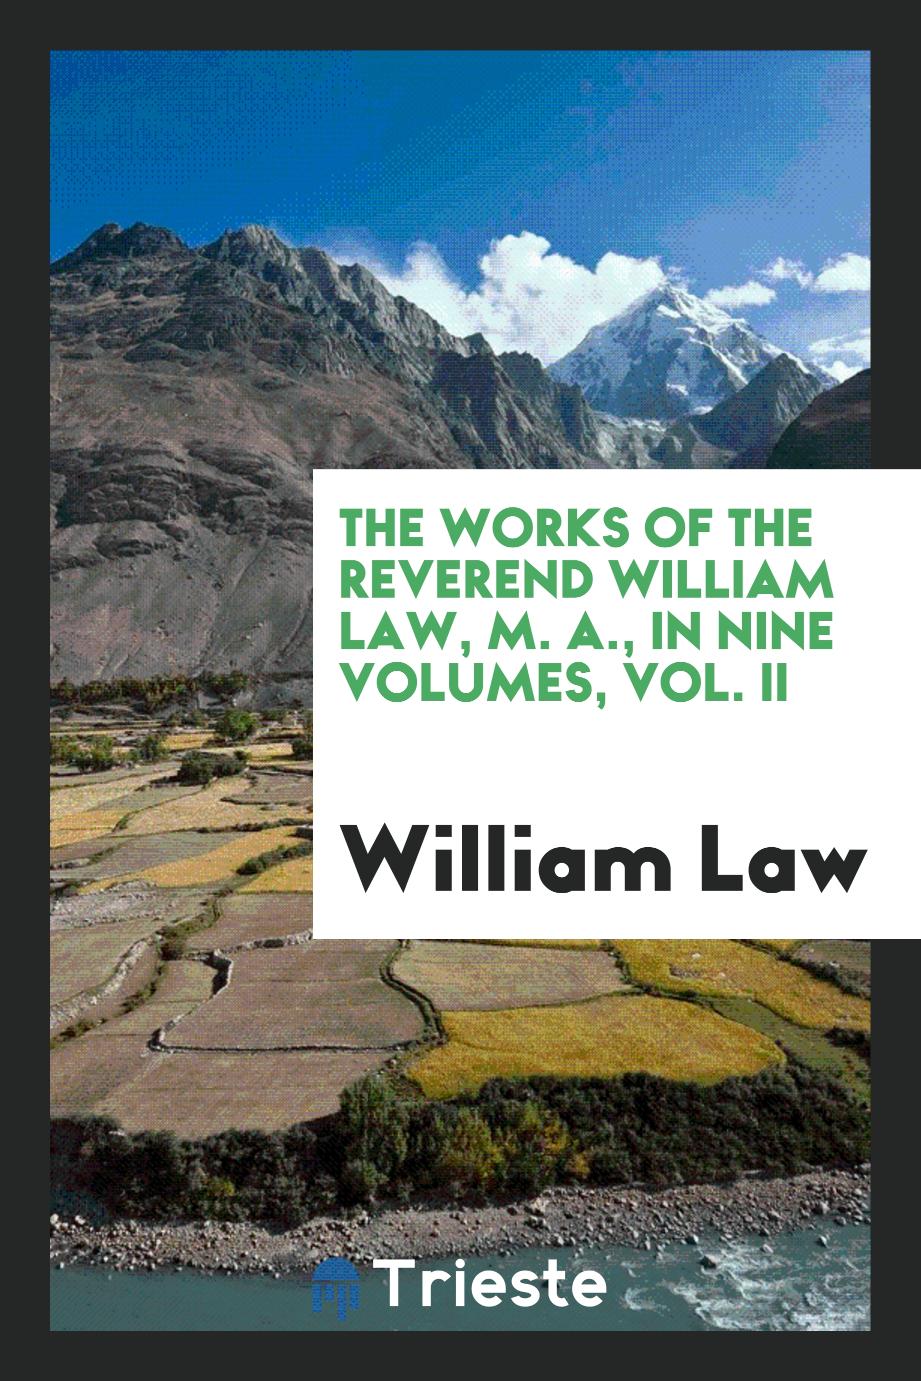 The works of the Reverend William Law, M. A., In Nine Volumes, Vol. II